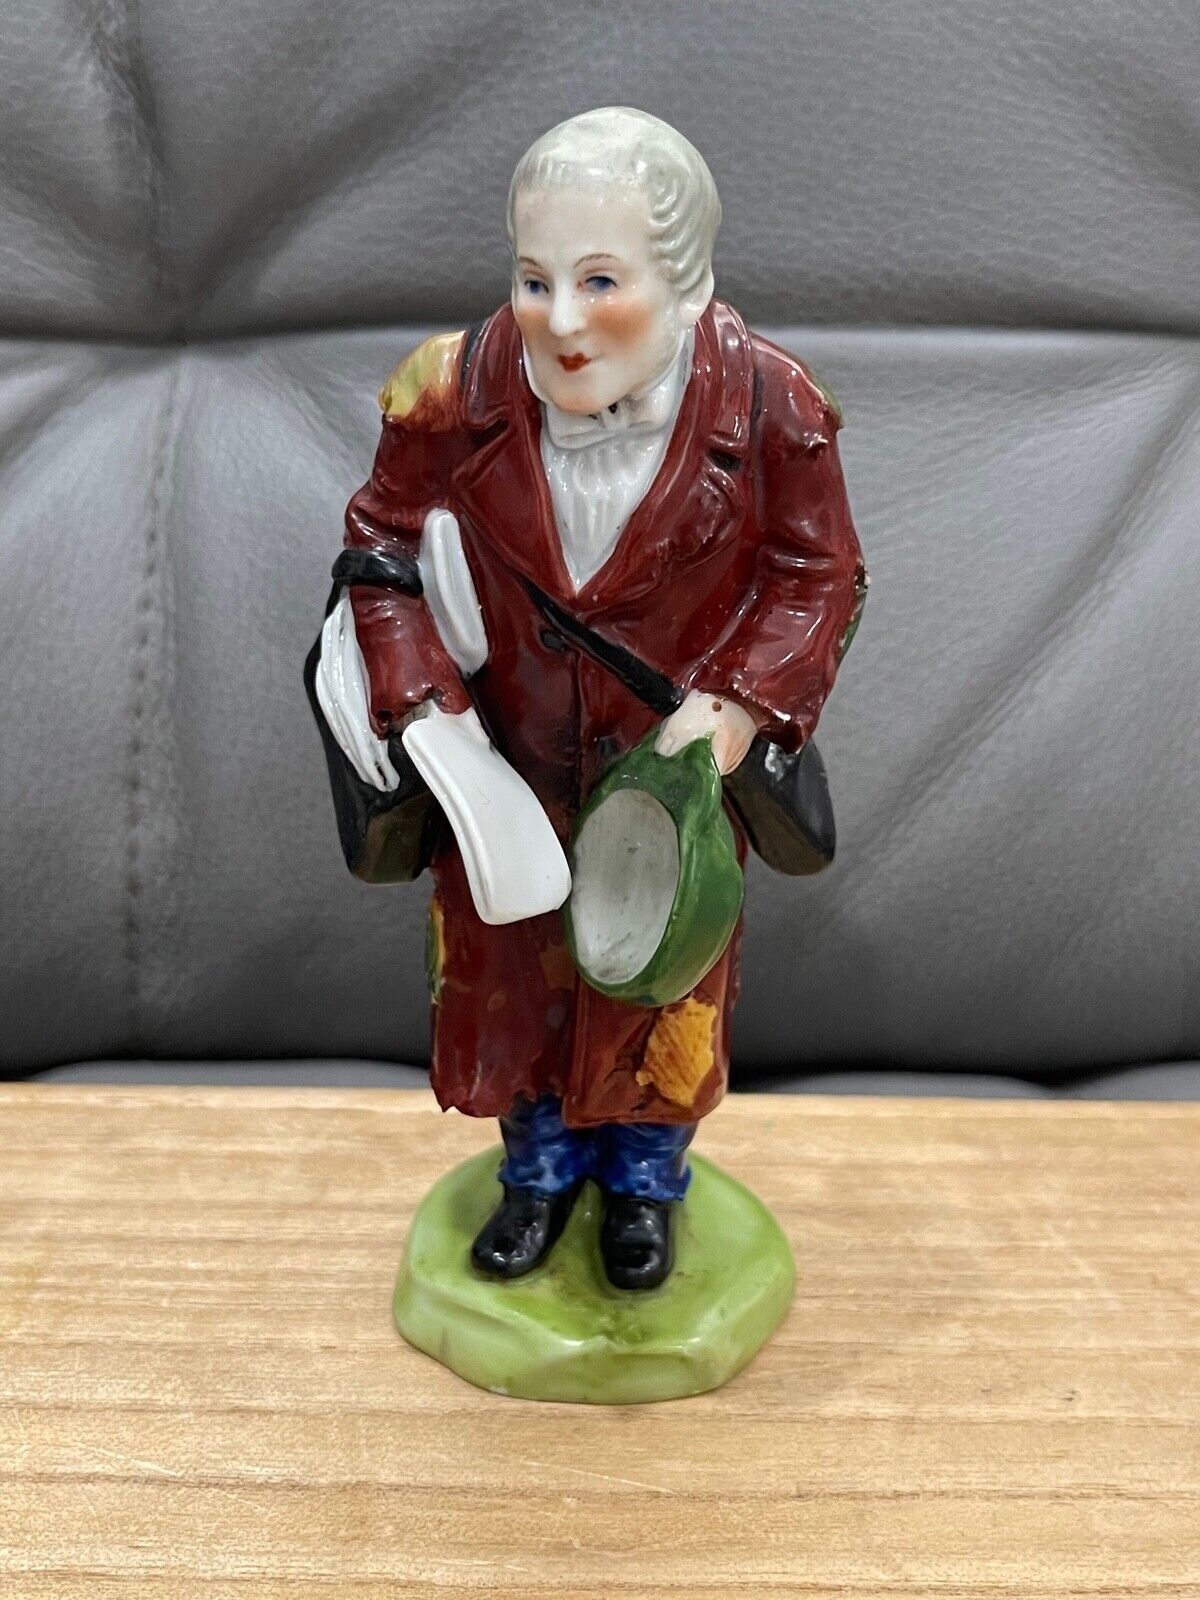 Antique German Kister Porcelain Figurine Man Carrying Papers Newspapers